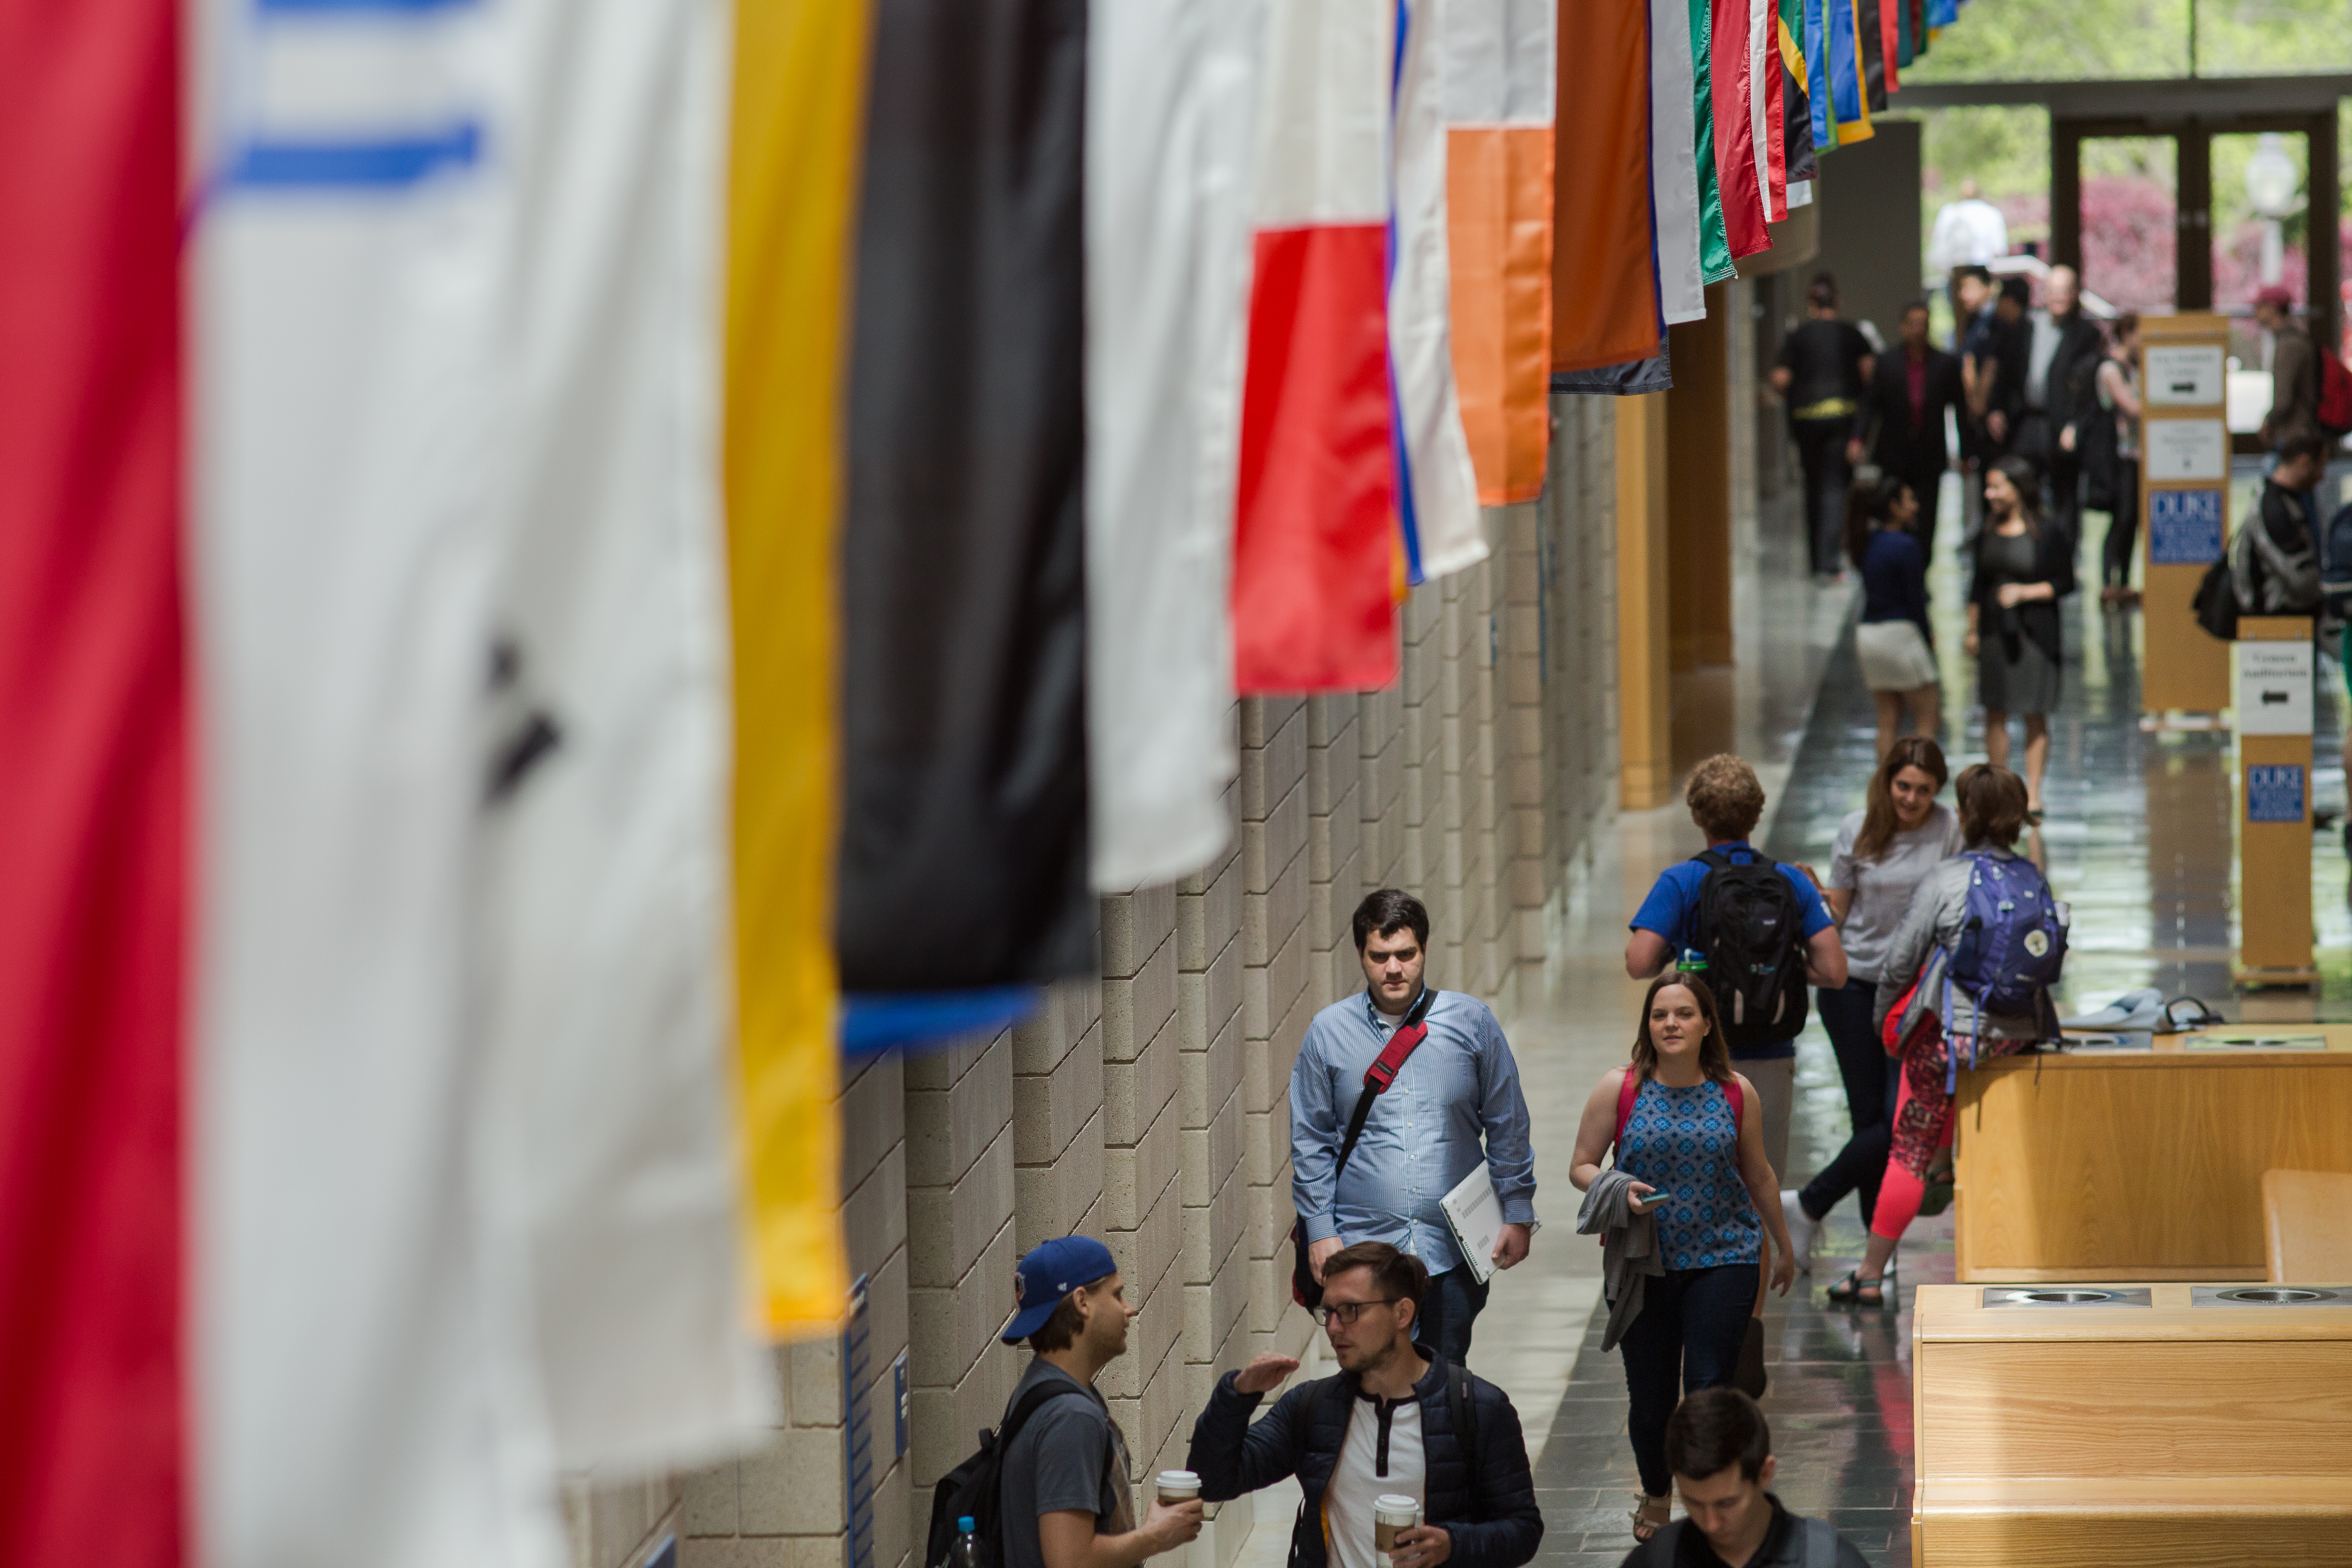 Students in Fuqua Mallway with flags